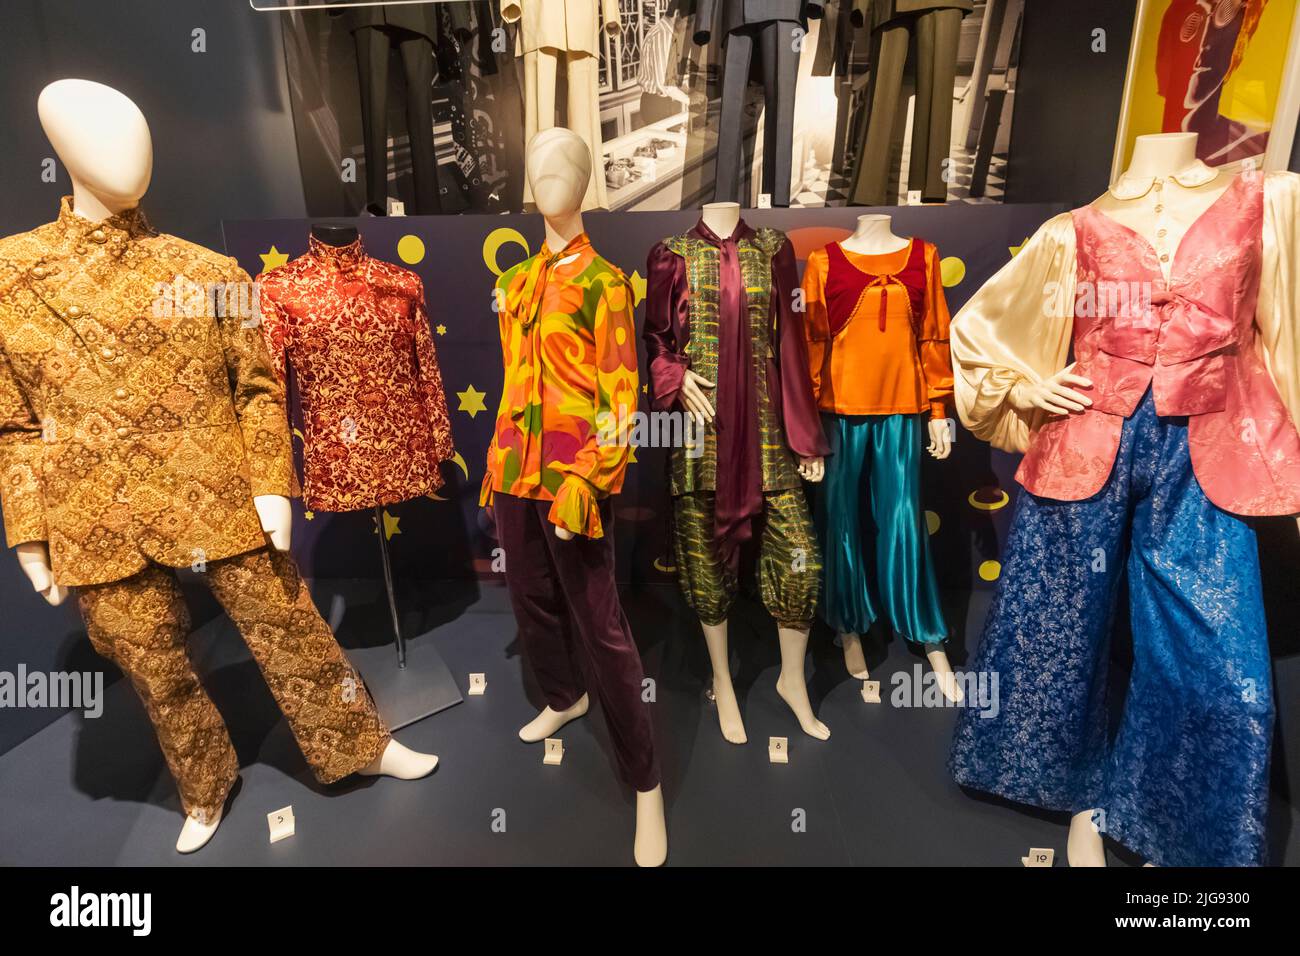 England, London, Southwark, Bermondsey, The Fashion and Textile Museum, Exhibit of 1960's and 1970's Womens Clothing Stock Photo